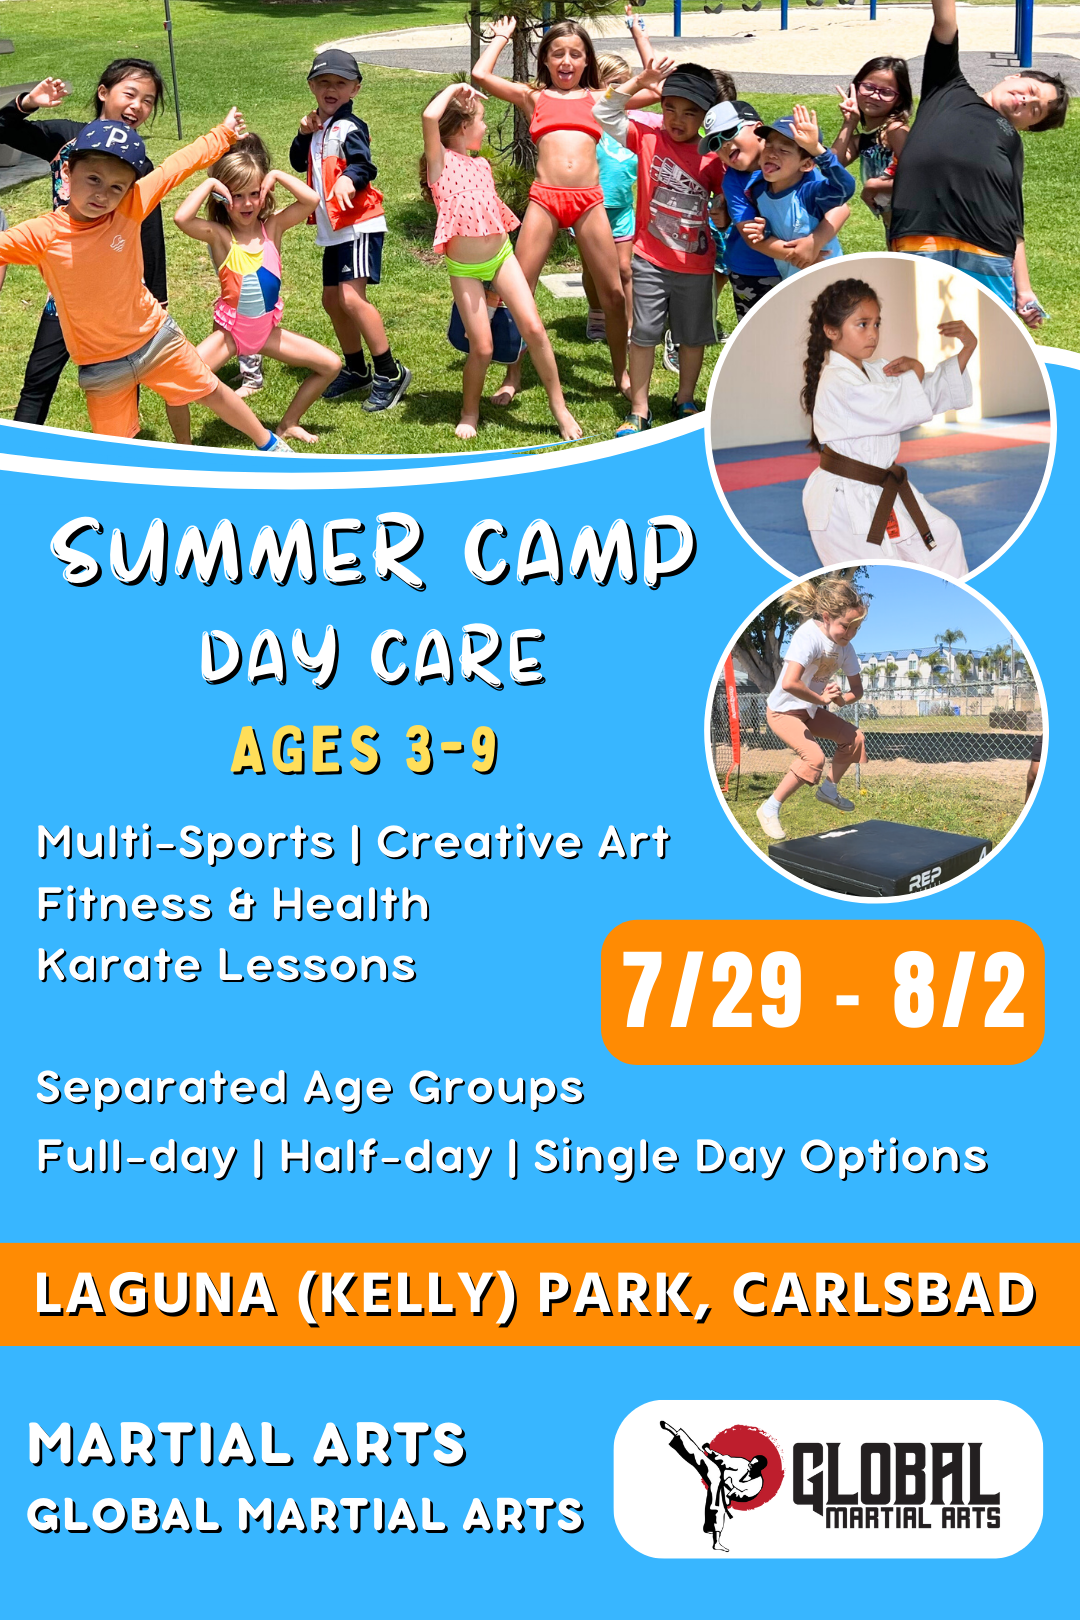 7/29 - 8/2  | Mon - Fri | 8:30 - 4:00<br>Multi-Sports, Art, and Martial Arts<br>Laguna (Kelly) Park, Carlsbad<br>Ages 3-9 | Separated Age Groups